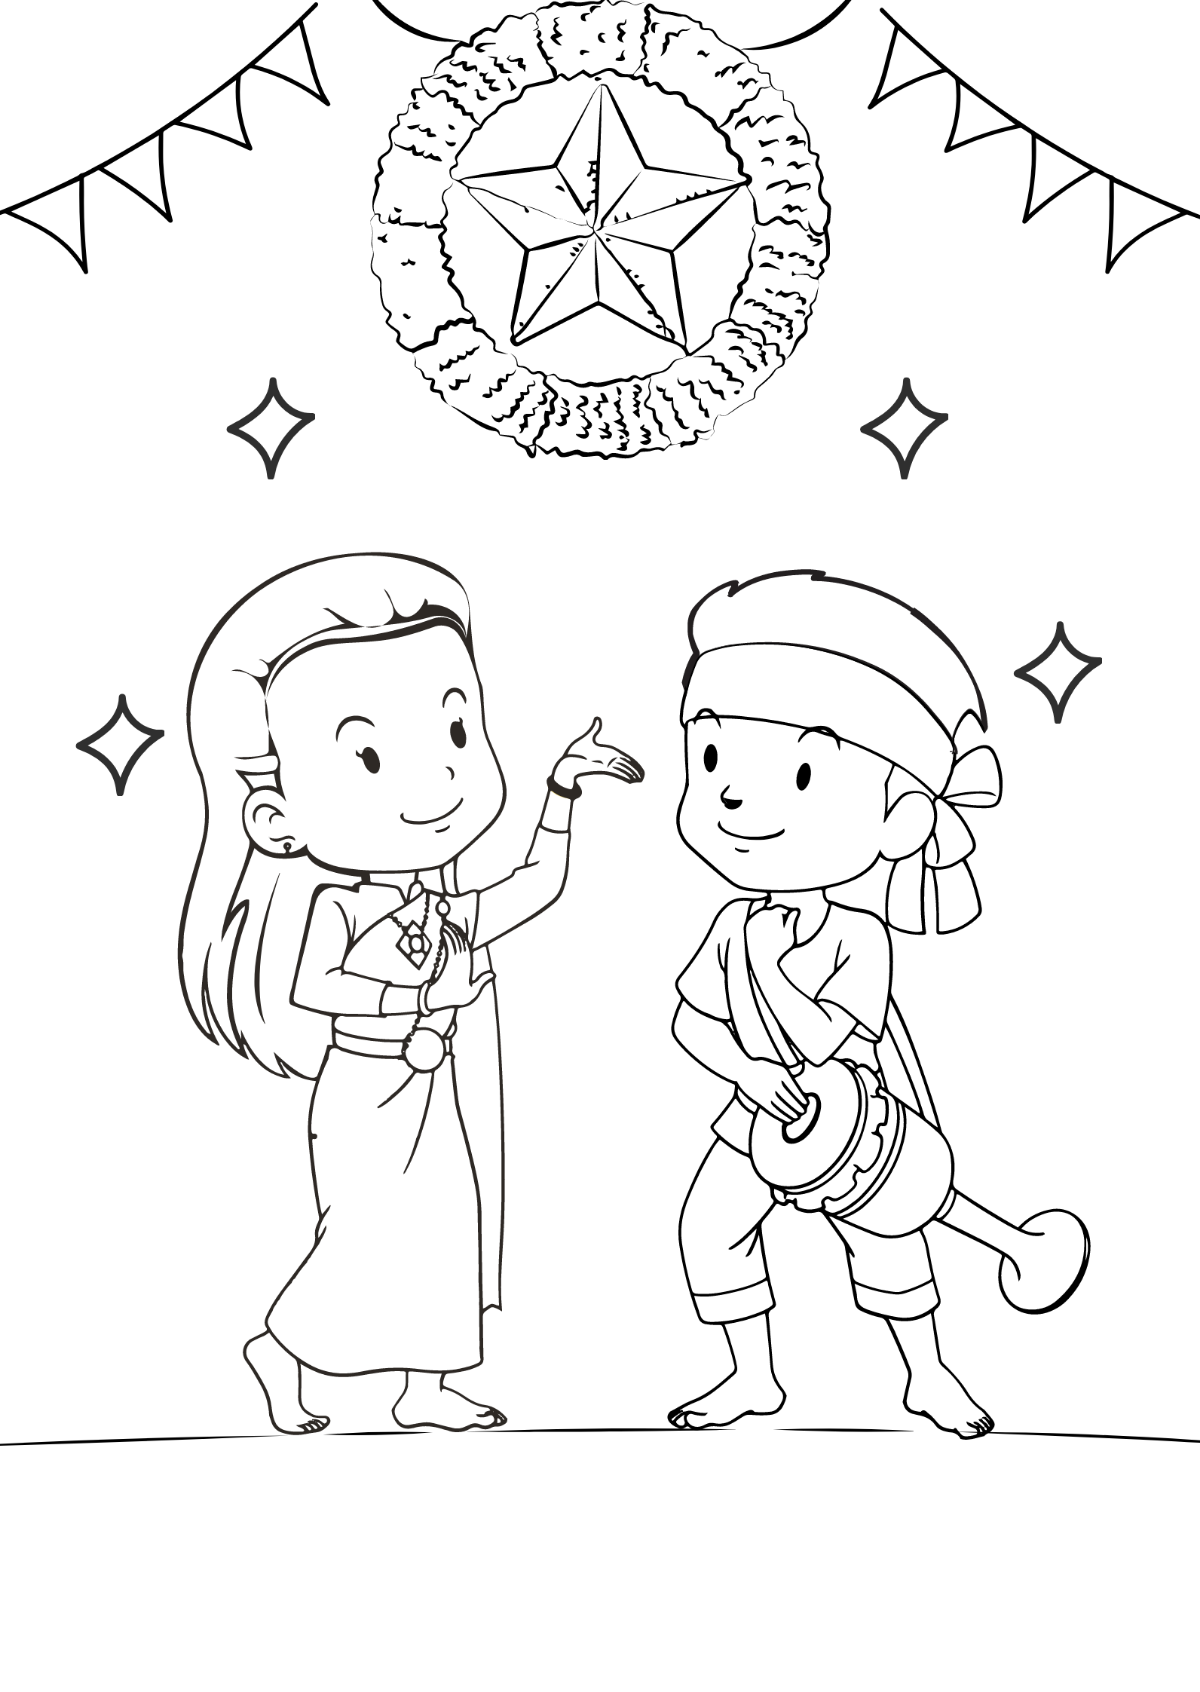 Free Khmer New Year Drawing Template